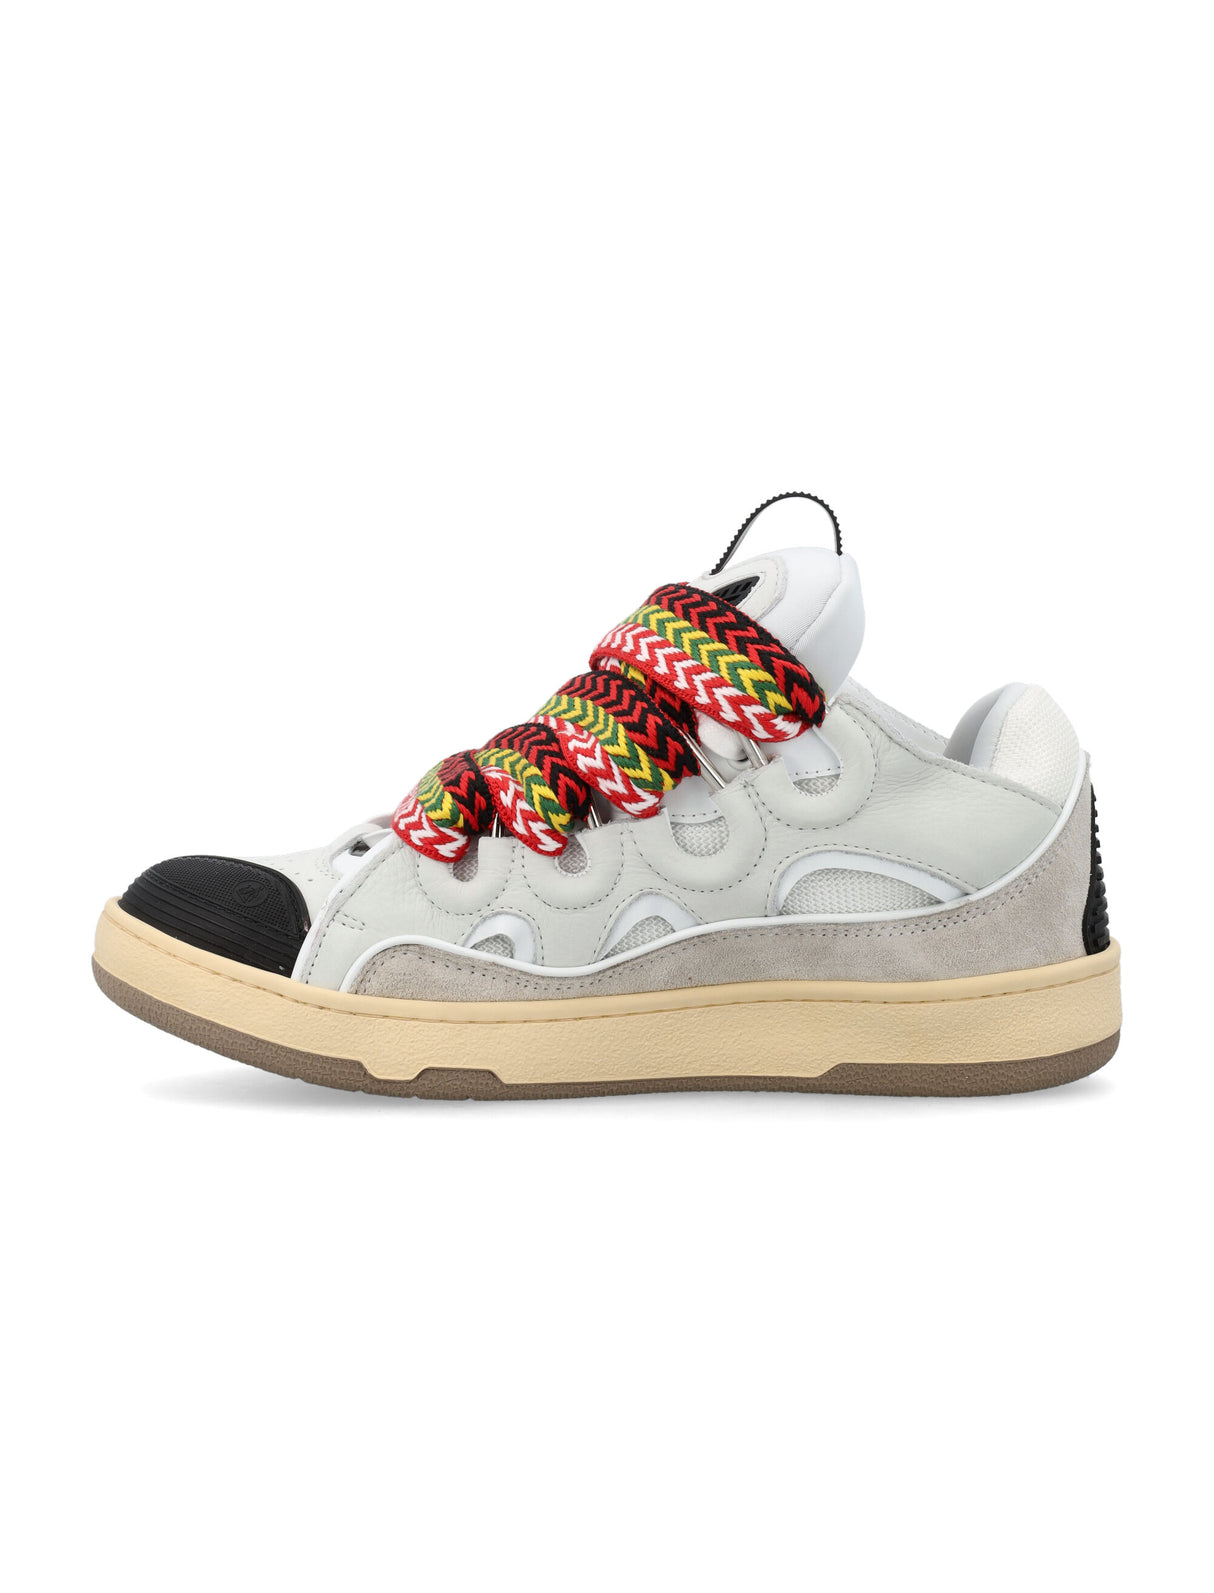 LANVIN Quilted Leather Curb Sneaker for Men by a Top Designer